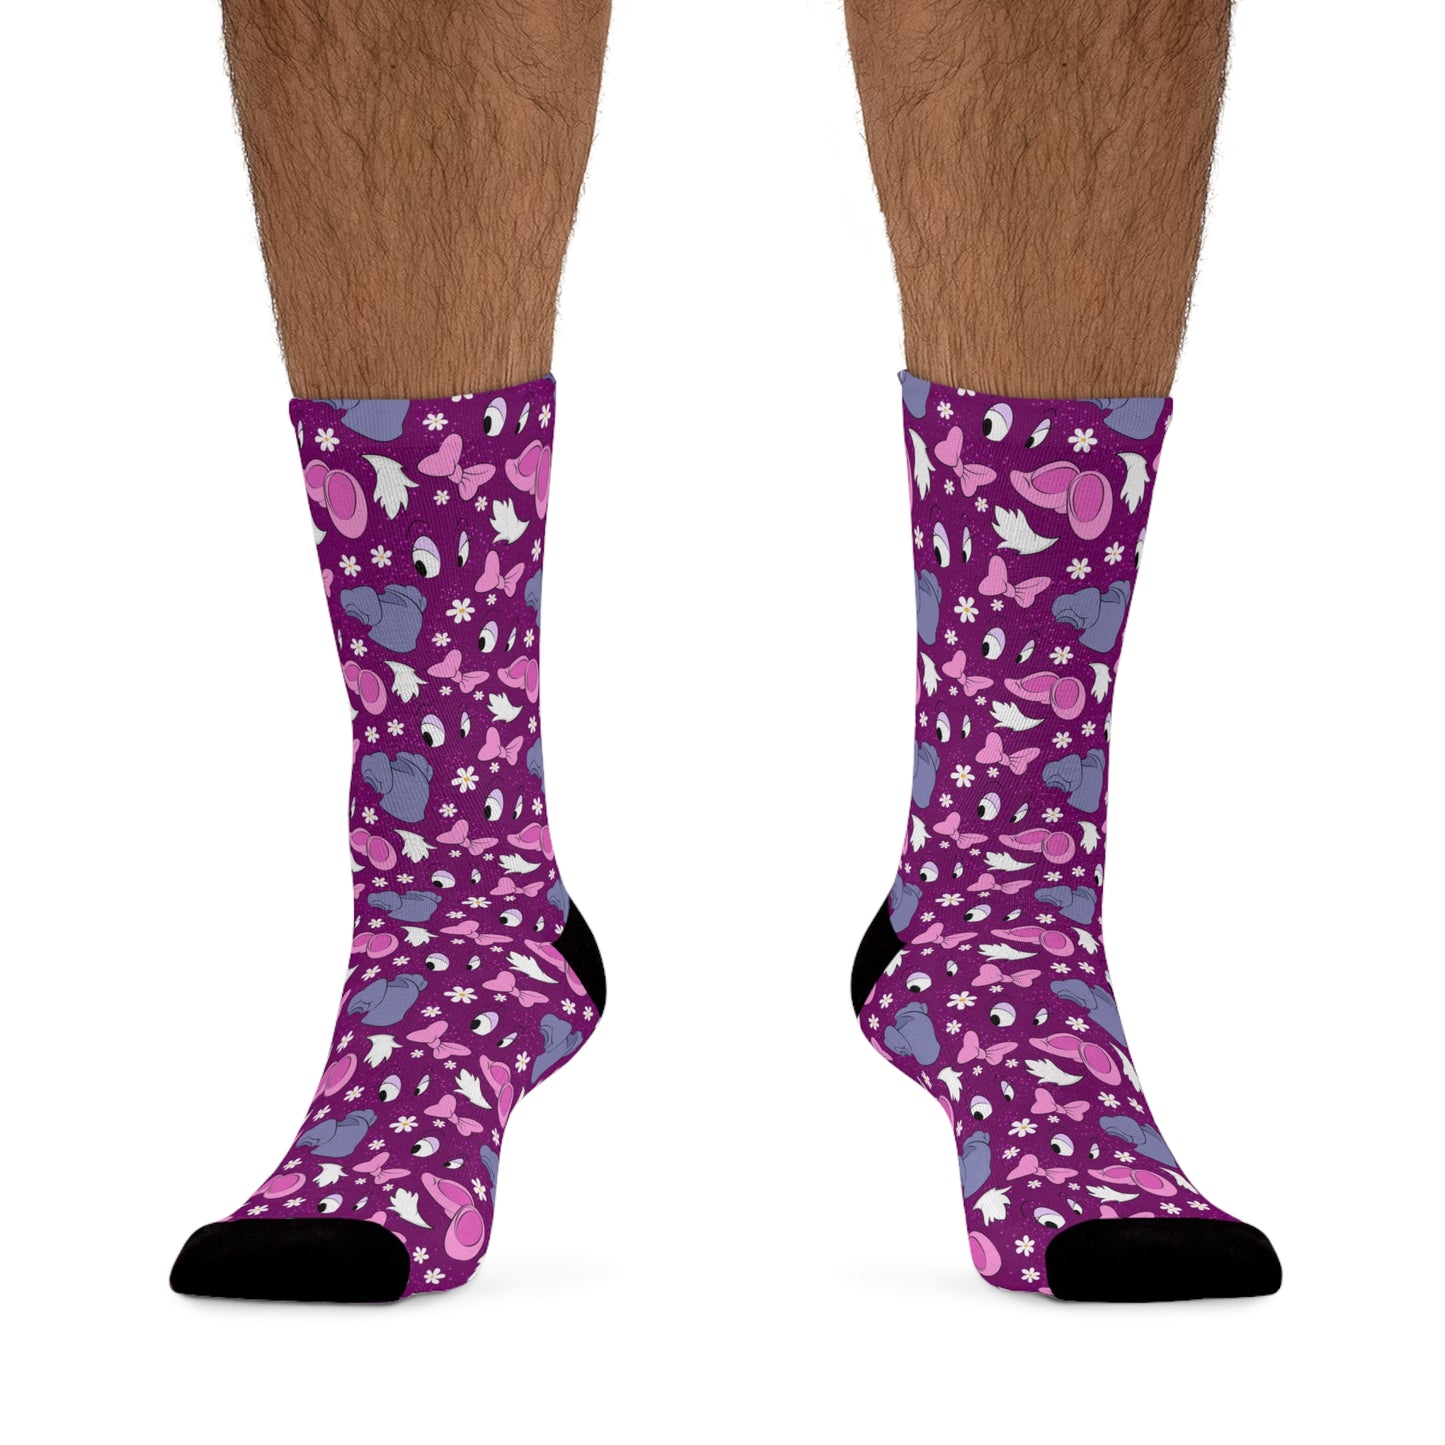 Born To Stand Out Socks